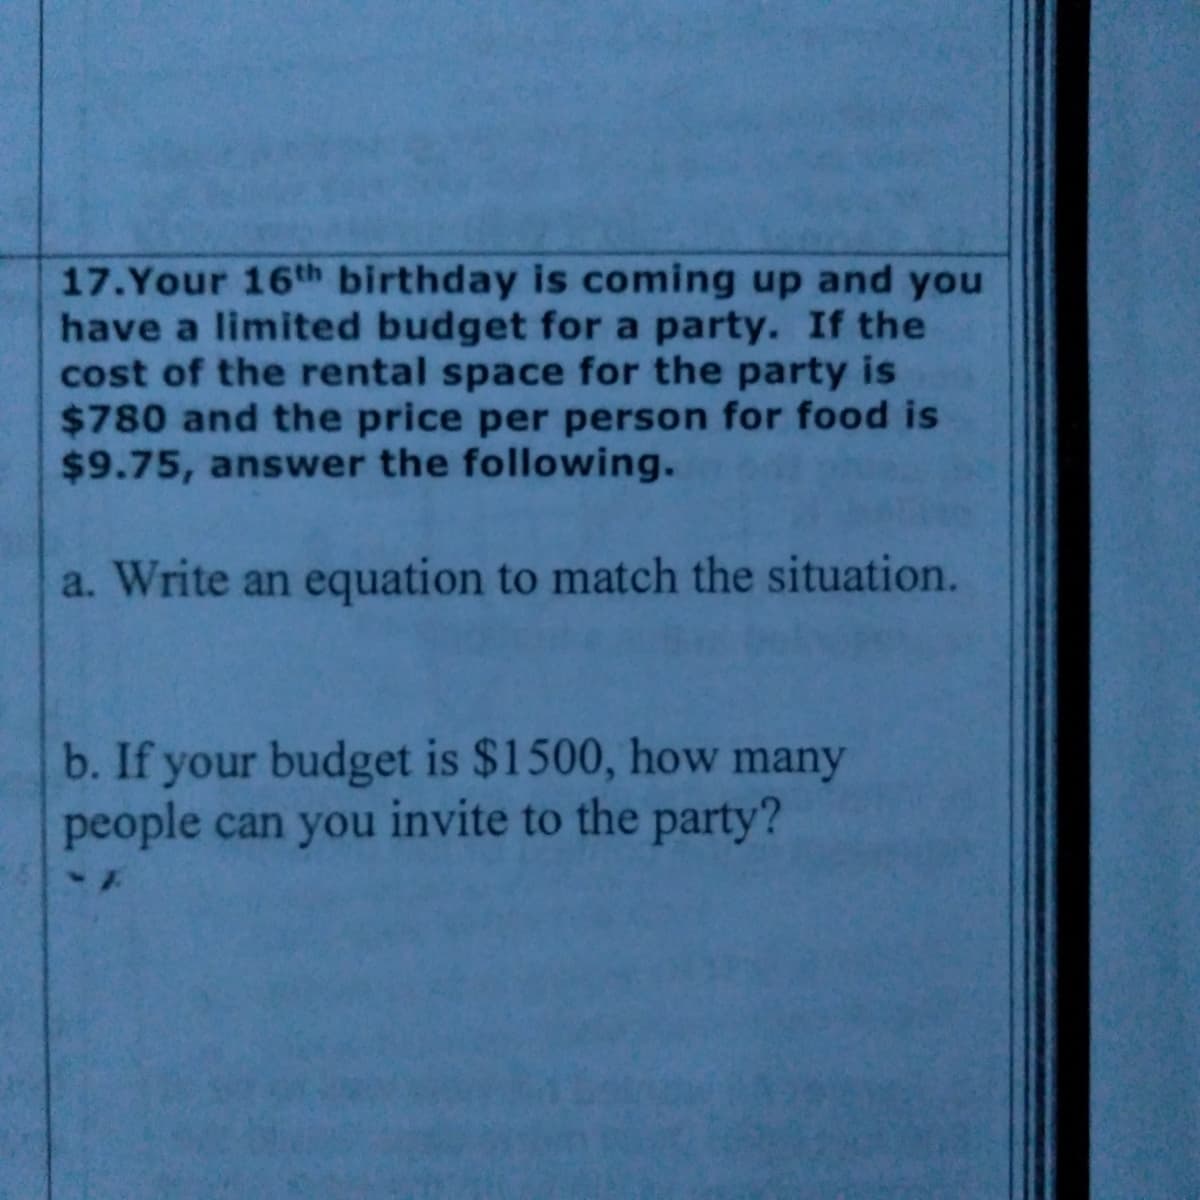 17.Your 16th birthday is coming up and you
have a limited budget for a party. If the
cost of the rental space for the party is
$780 and the price per person for food is
$9.75, answer the following.
a. Write an equation to match the situation.
b. If your budget is $1500, how many
people can you invite to the party?
1-
